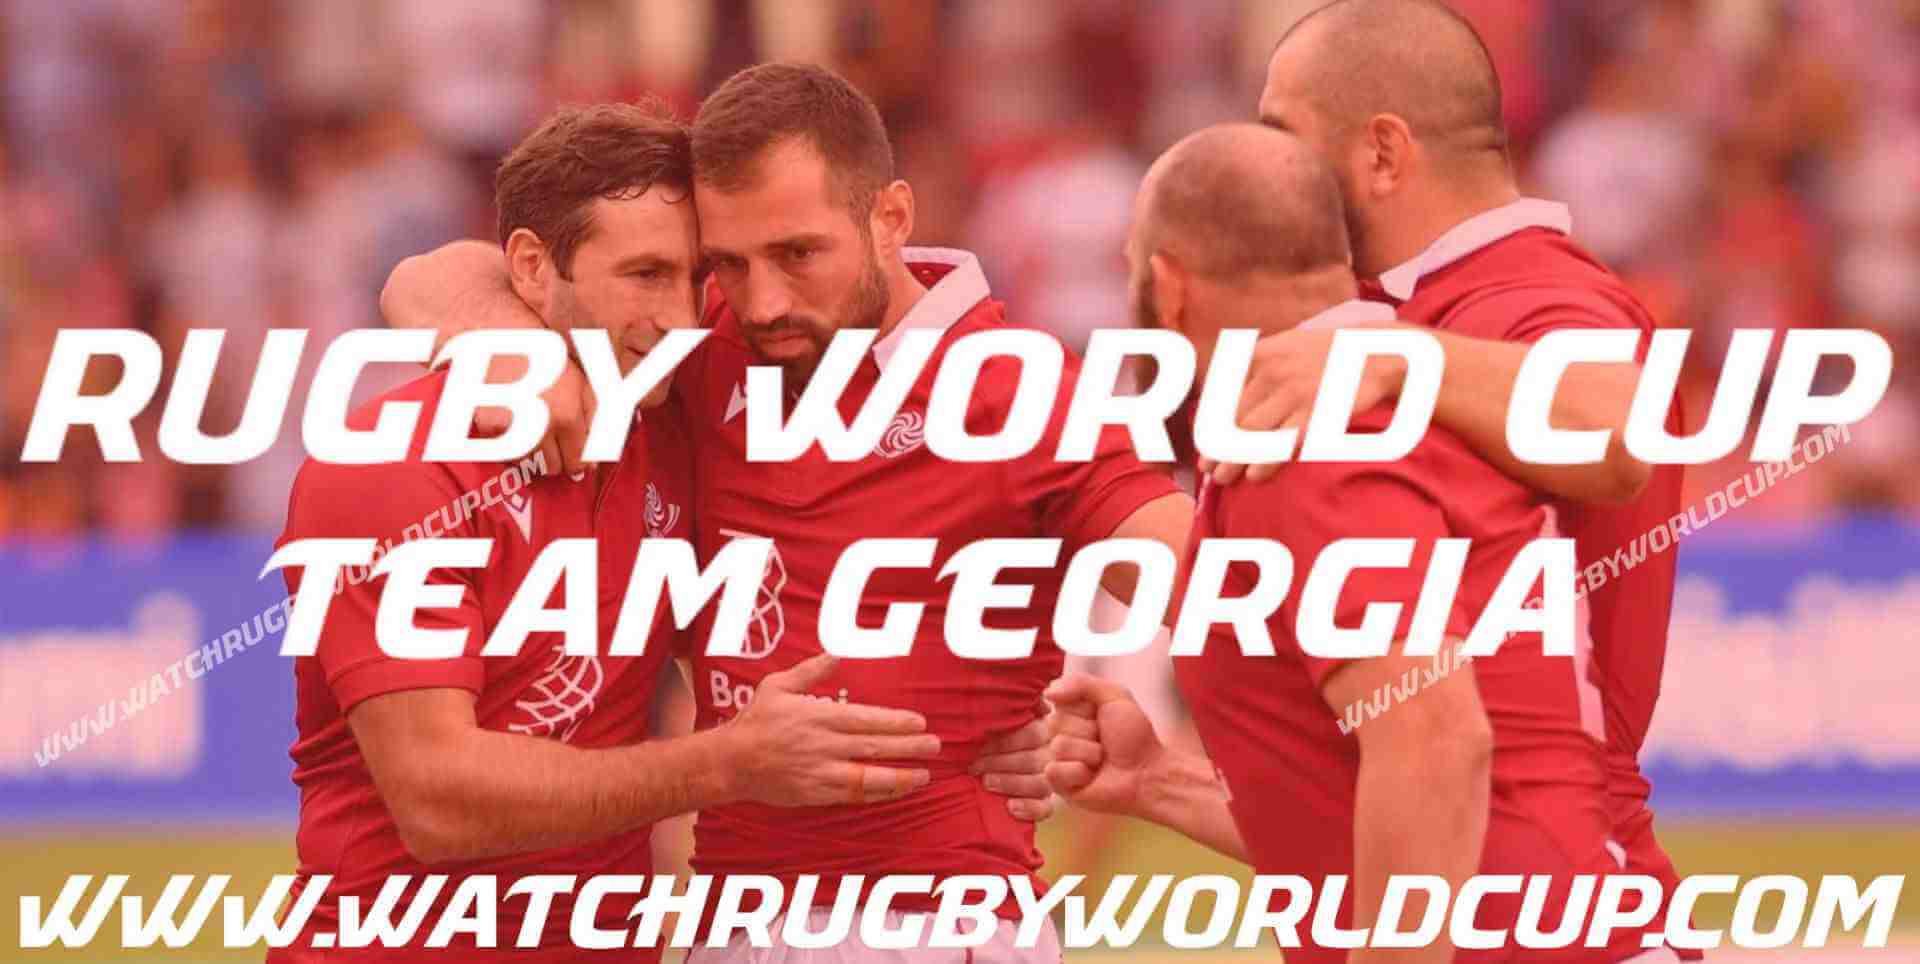 Team Georgia in Rugby World Cup live